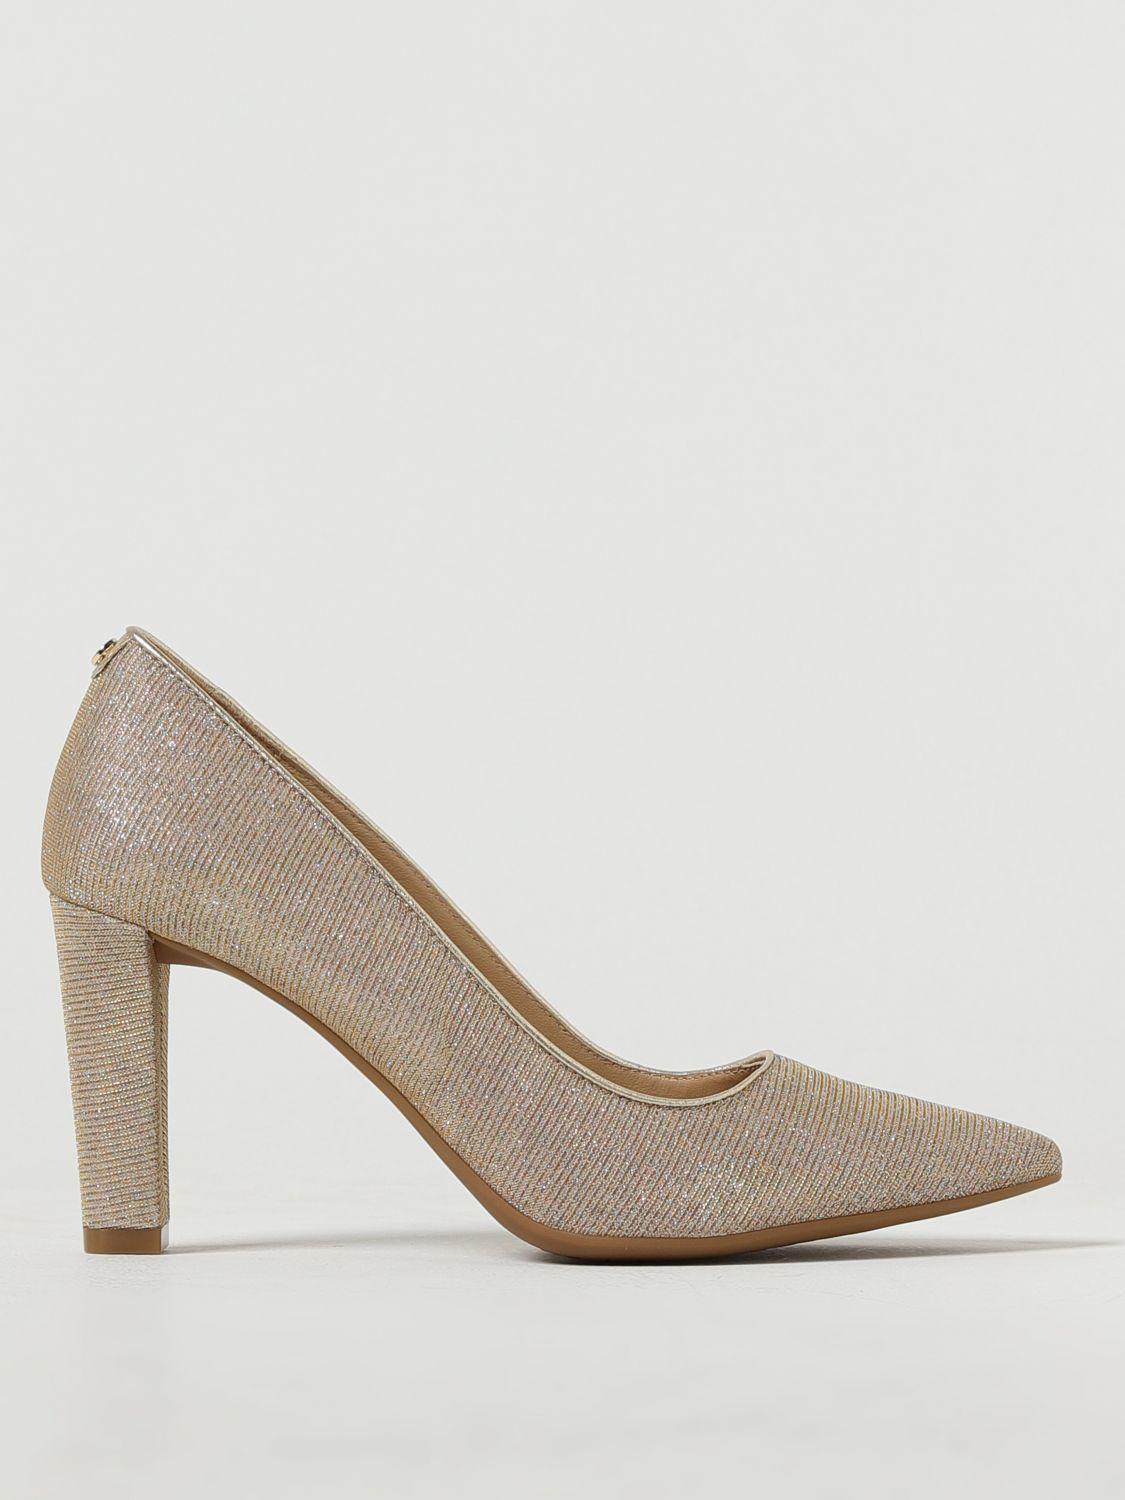 Michael Kors High Heel Shoes in Natural | Lyst Canada